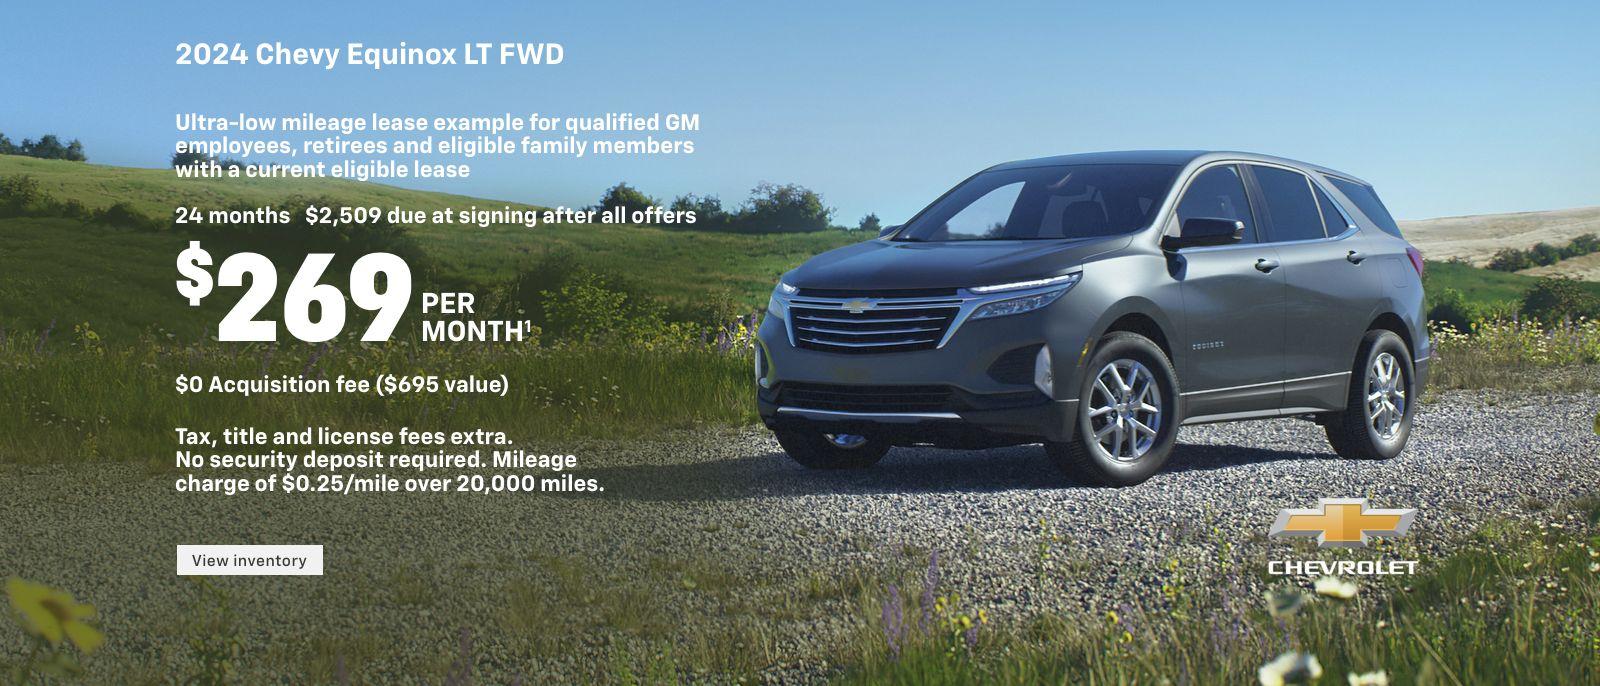 2024 Chevy Equinox LT FWD. Ultra-low mileage lease example for qualified GM employees, retirees and eligible family members with a current eligible lease. $269 per month. 24 months. $2,509 due at signing after all offers. $0 Acquisition fee ($695 value). Tax, title and license fees extra. No security deposit required. Mileage charge of $0.25/mile over 20,000 miles.